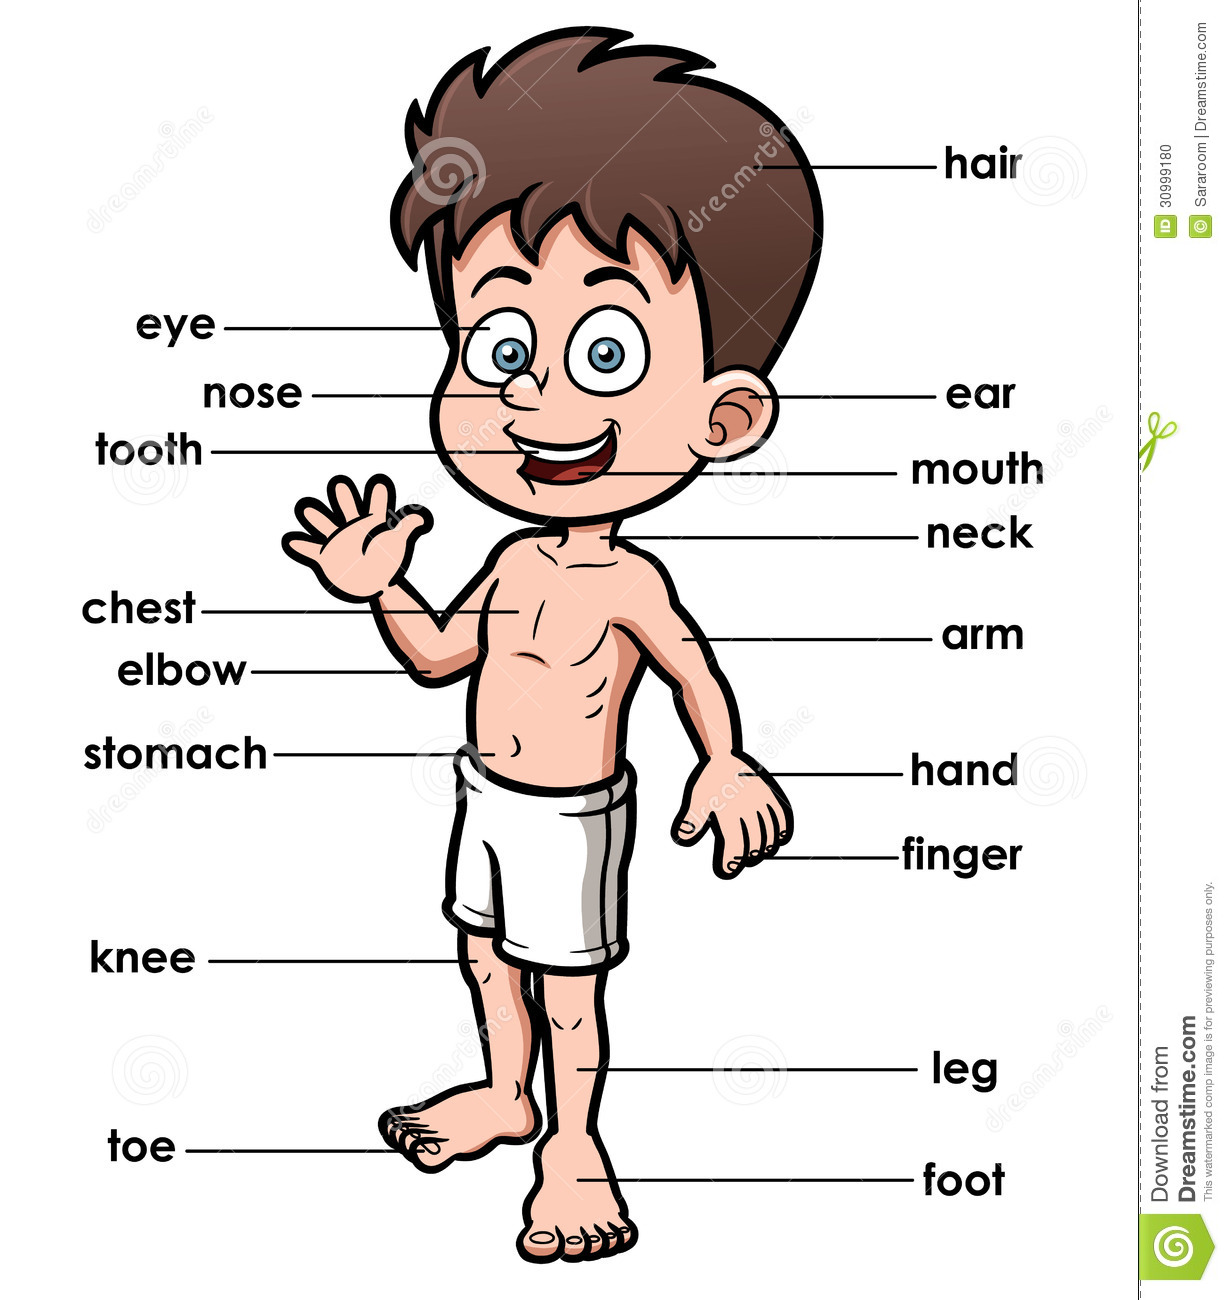 Body part clipart - Clipground